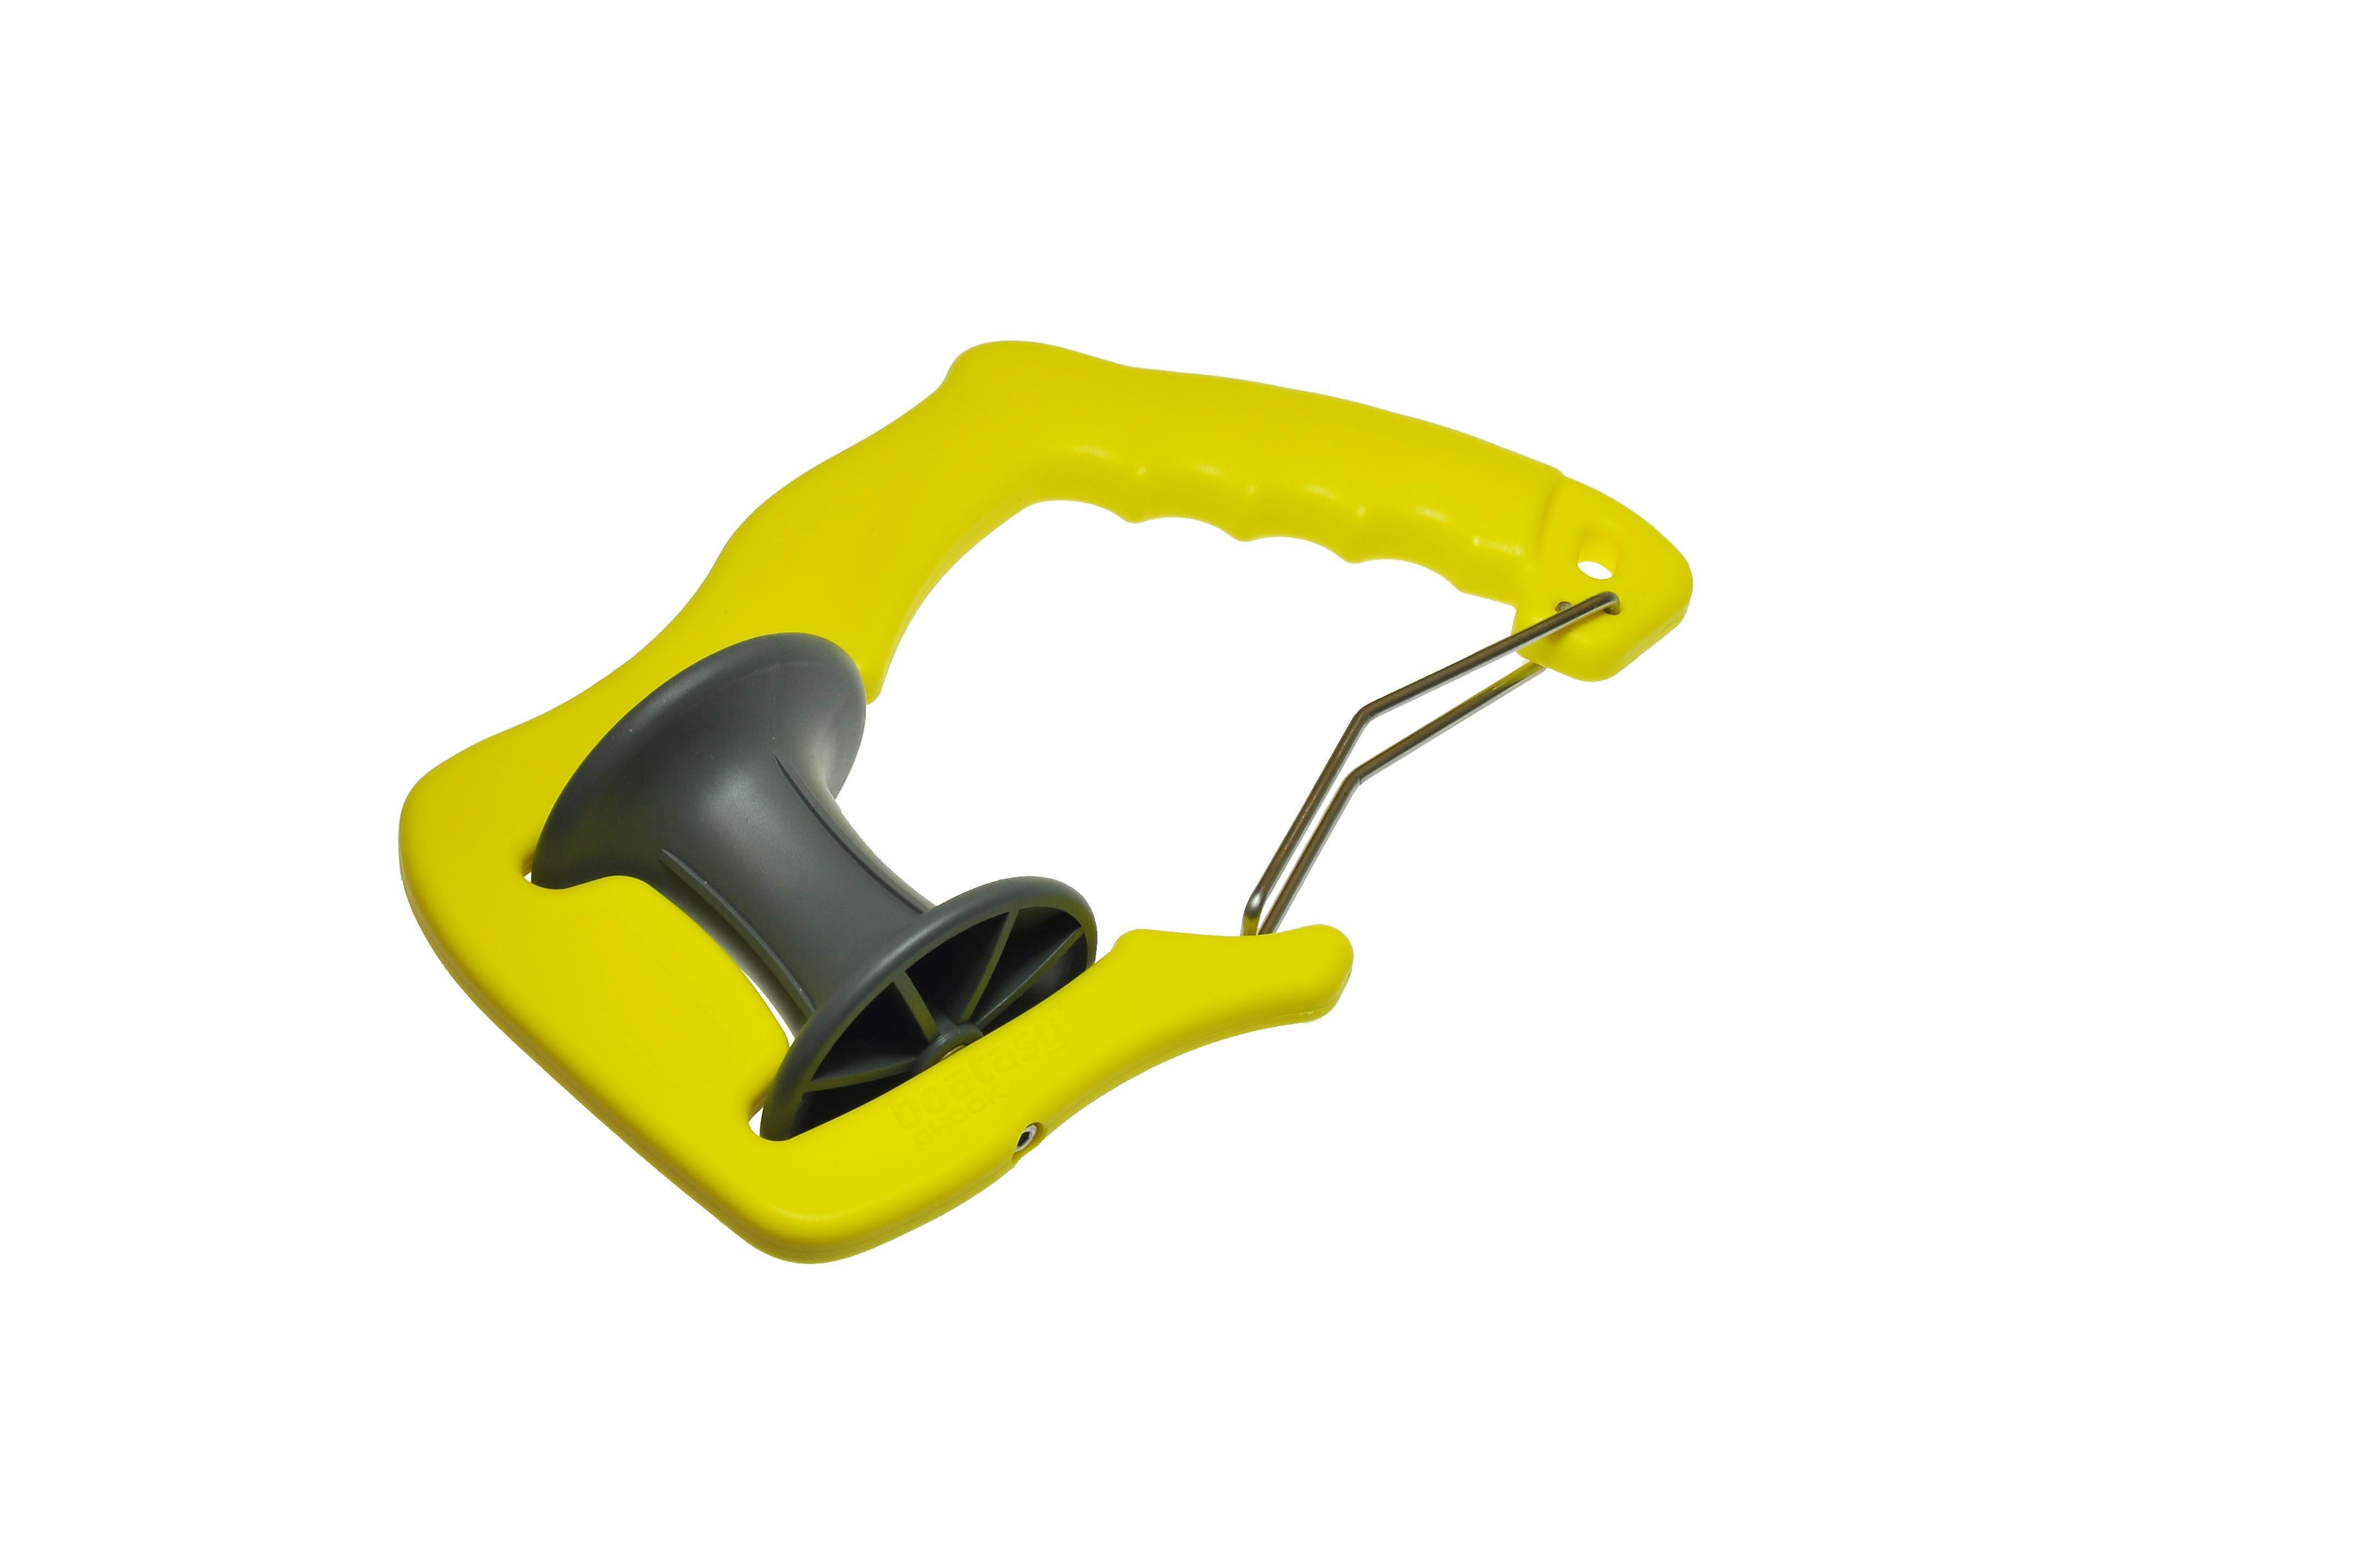 GHOOK European Made Rotating Mooring Hook for Clean and Fast Mooring Line Transfer-Canadian Marine &amp; Outdoor Equipment